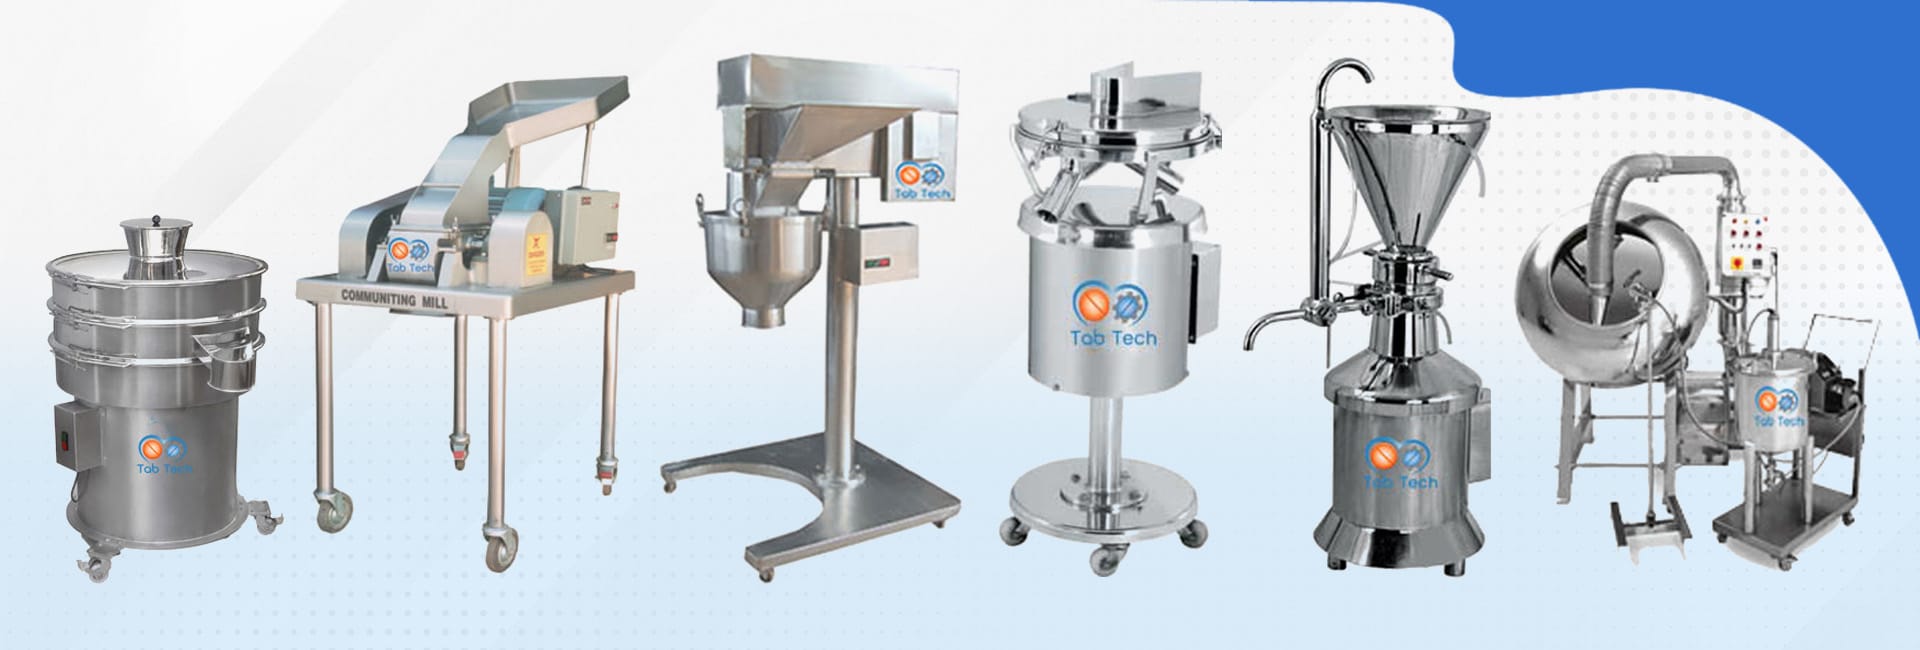 Rotary Tablet Press Machine Manufacturers